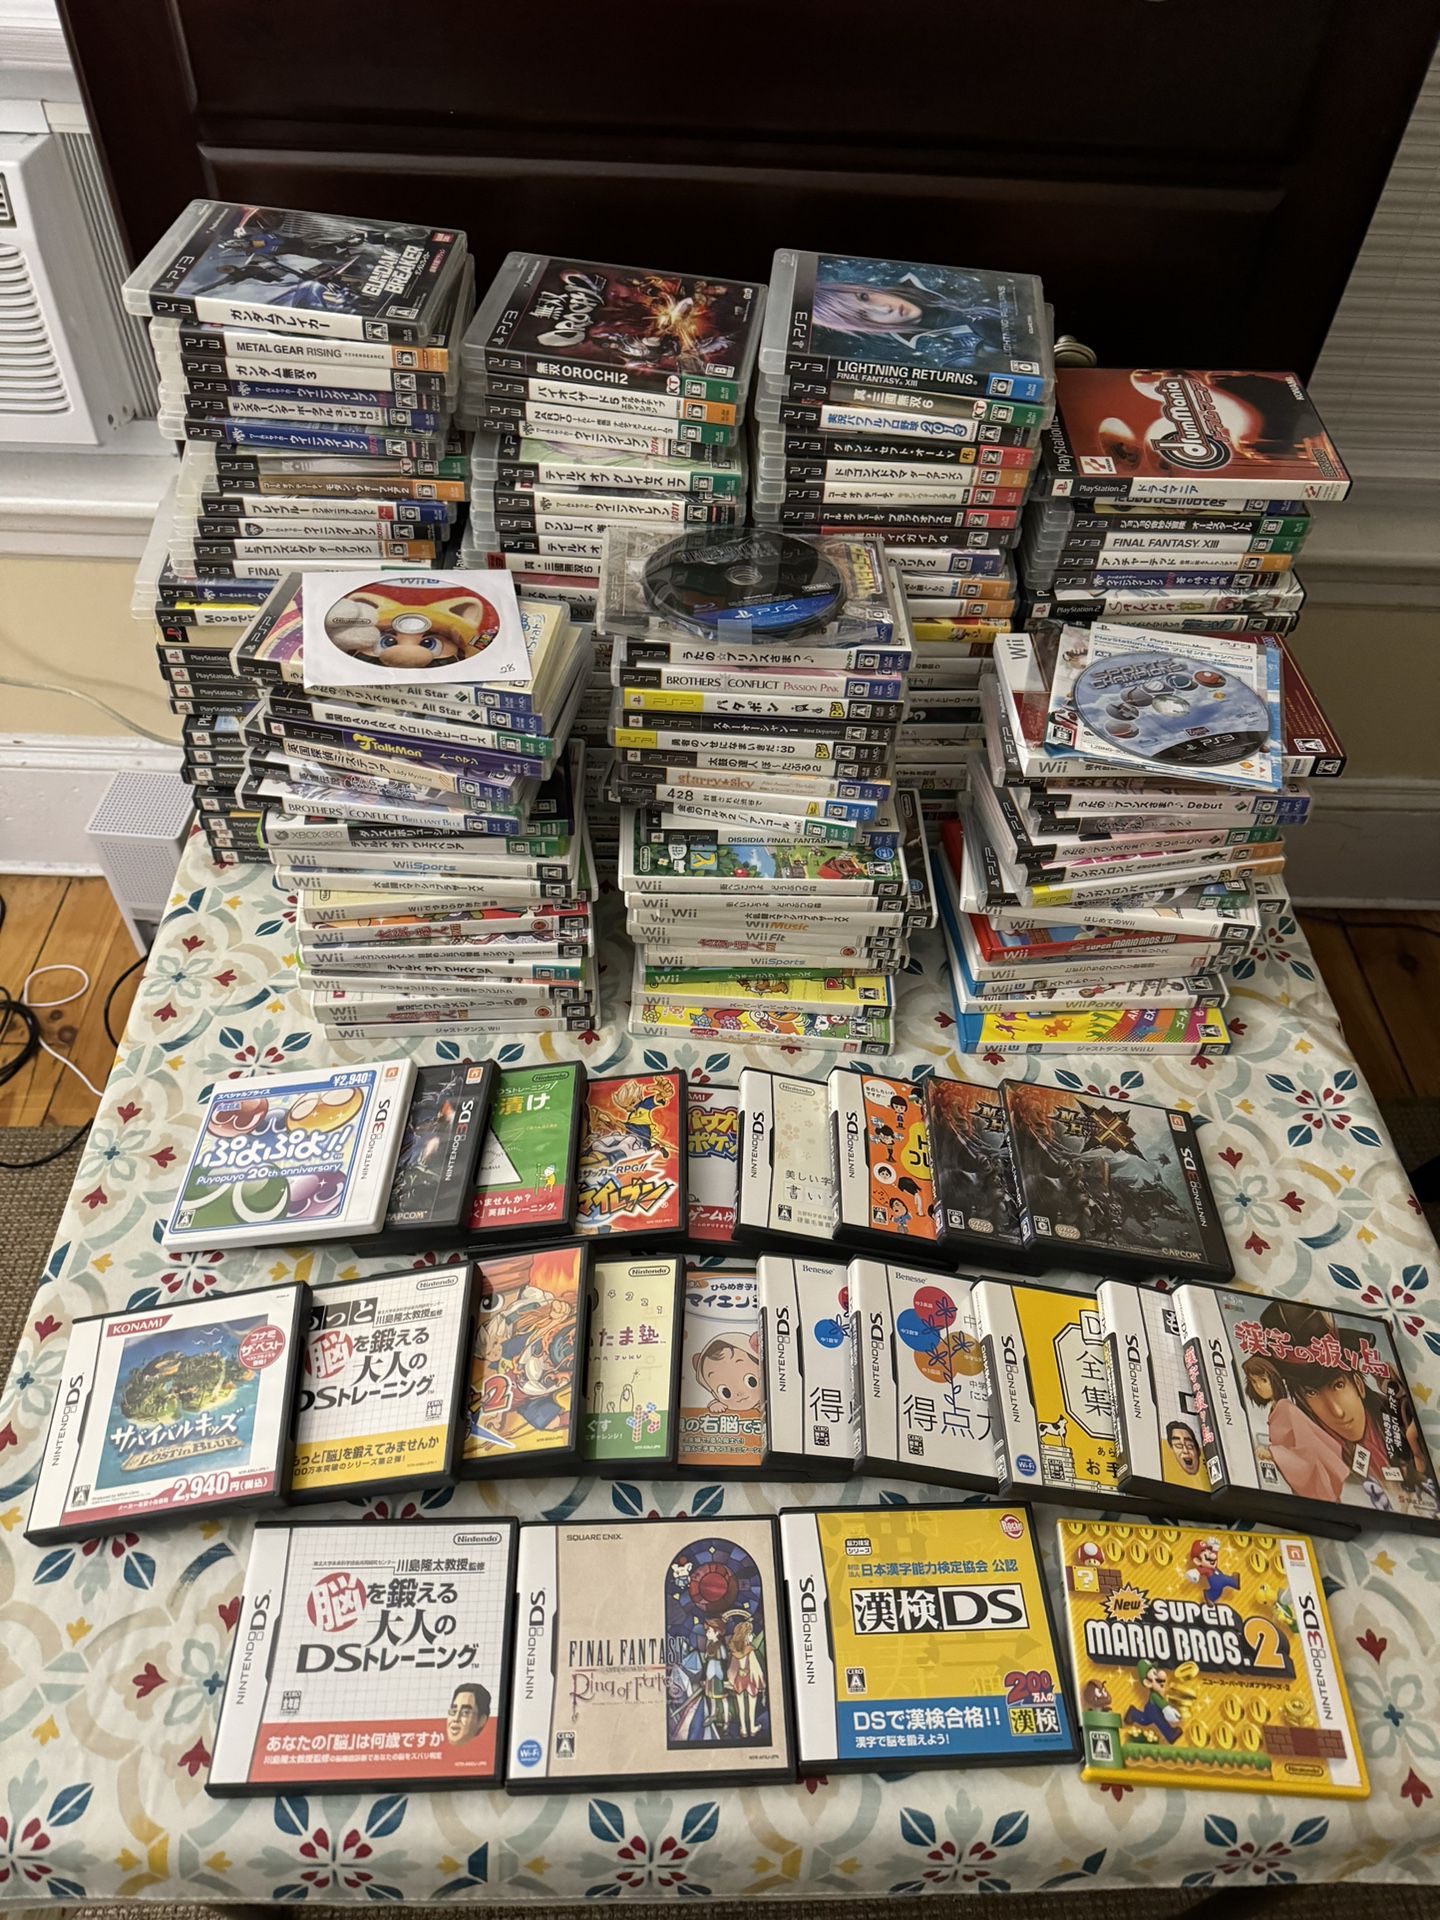 $10-12 // Video Games ** JAPAN IMPORTS ** (PS1-PS3, PSP, Wii, GAMECUBE, DS/3DS)